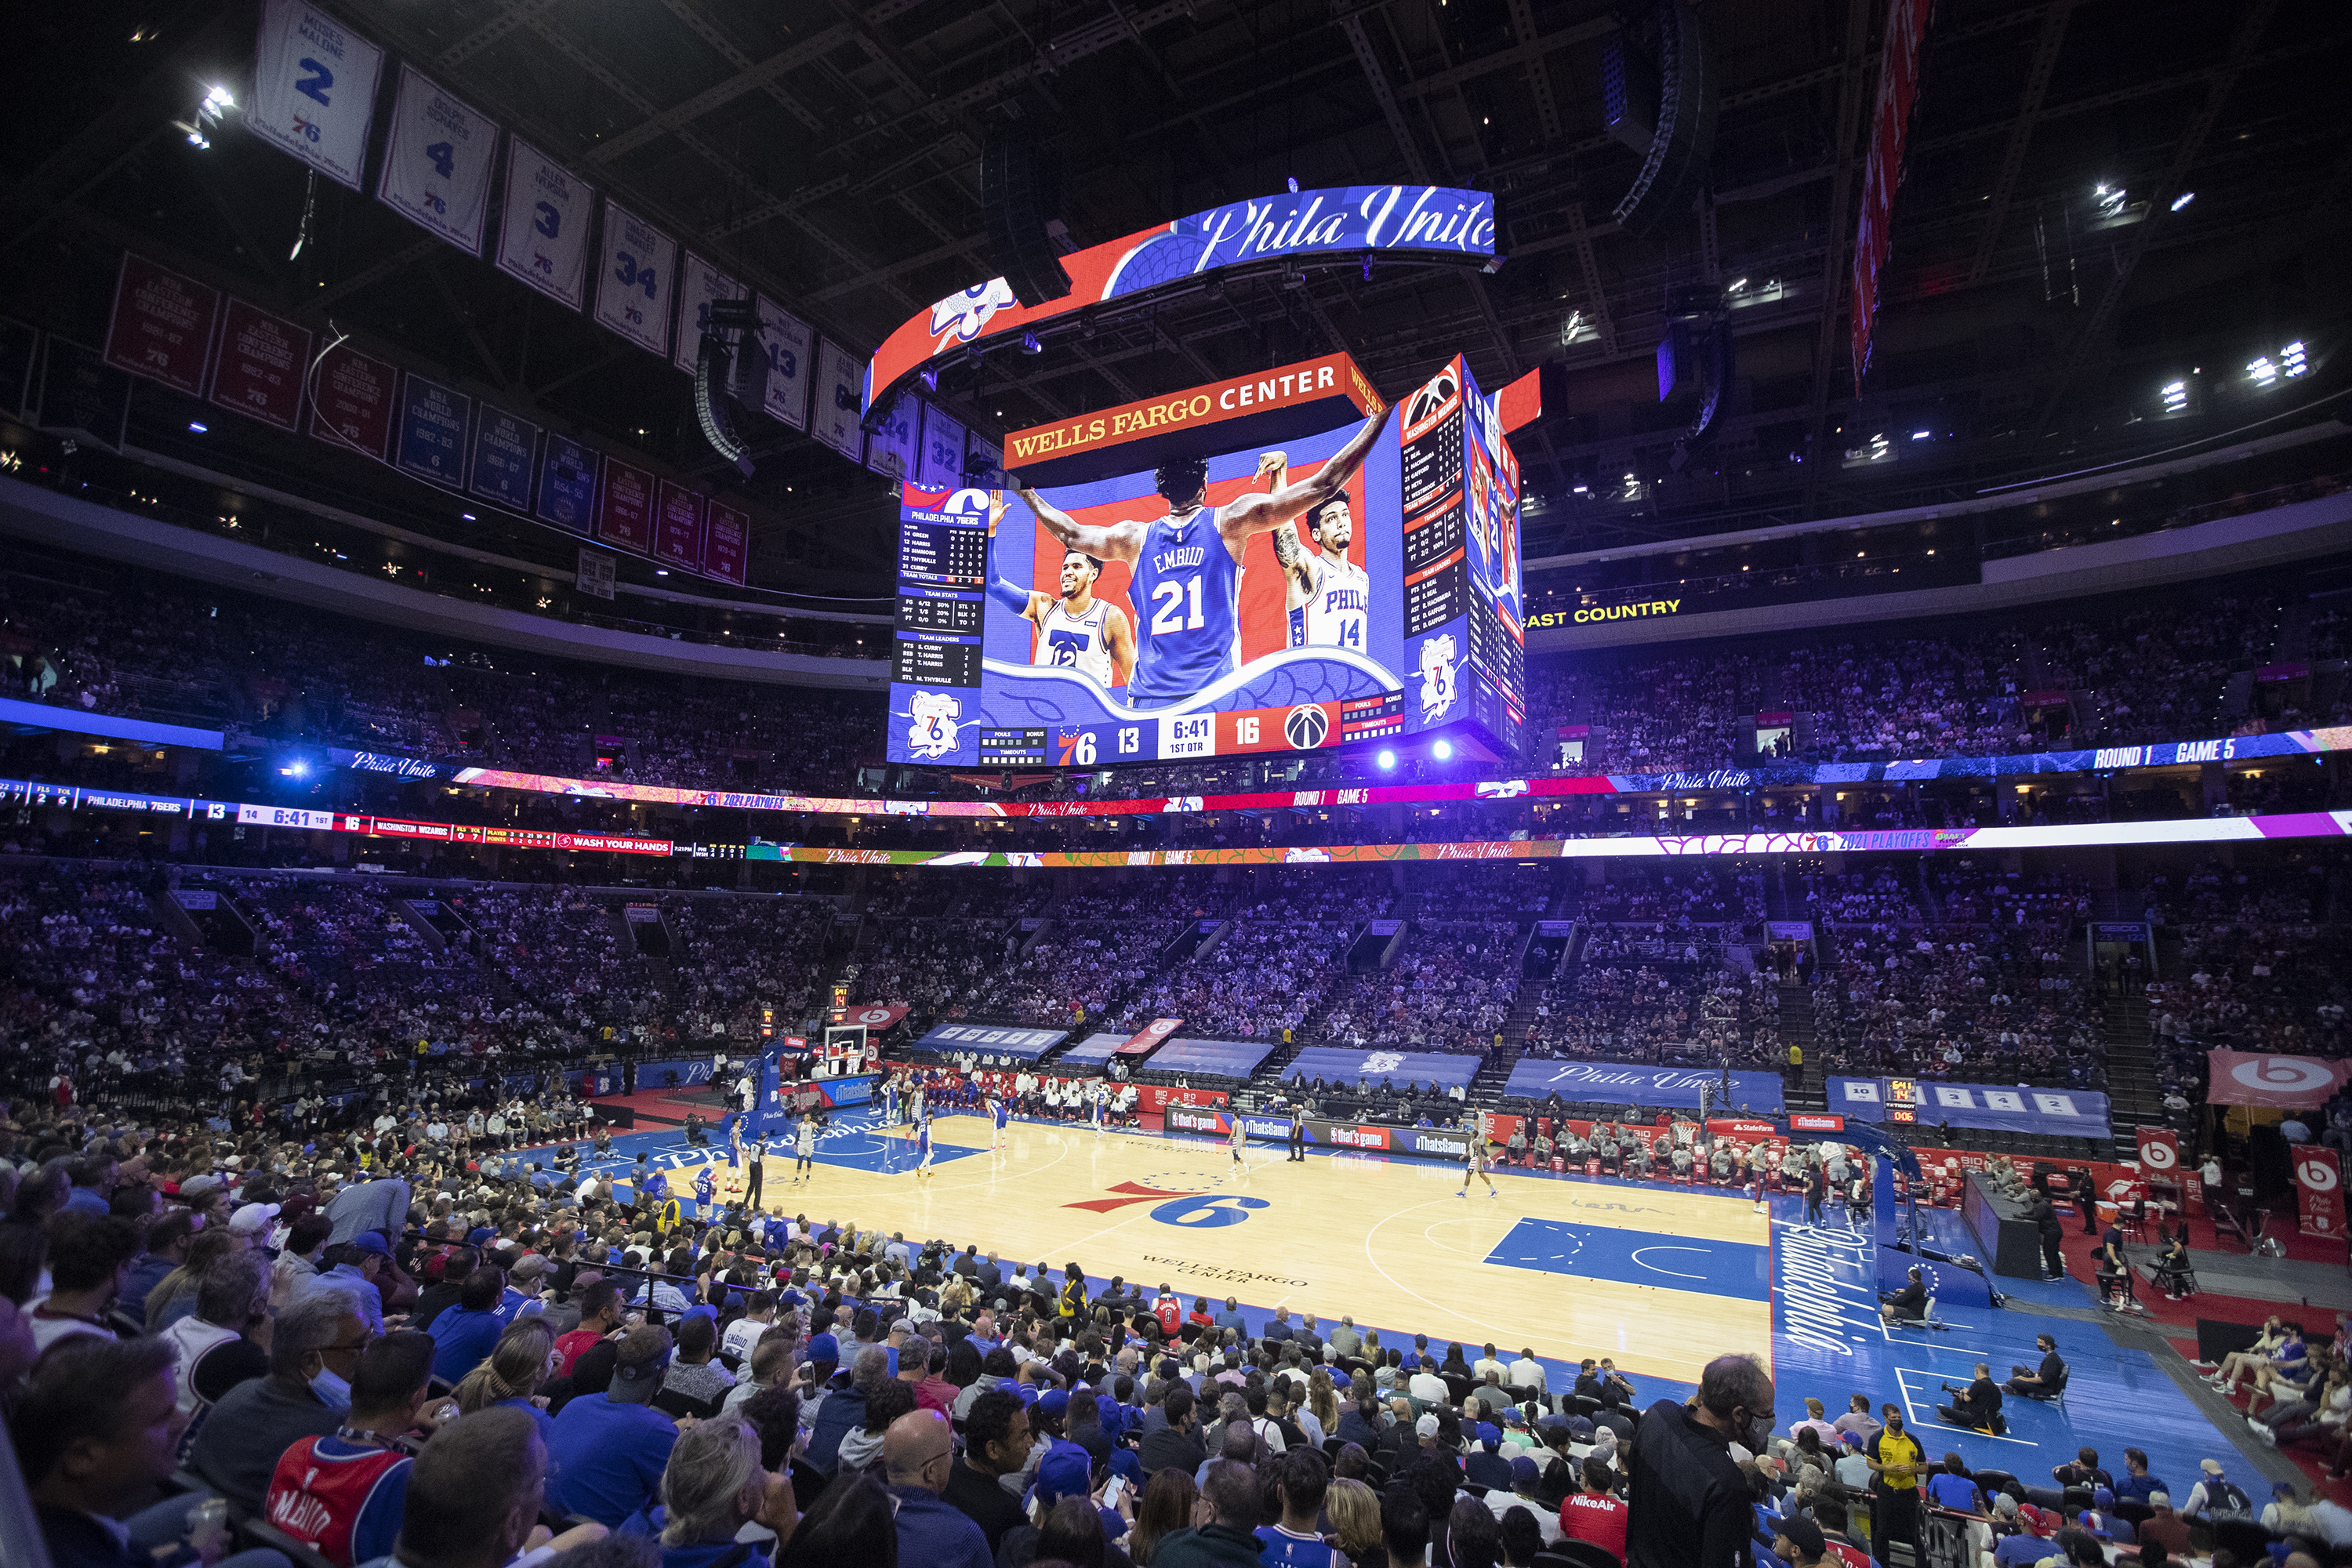 It appears as if the Sixers may have a new court design